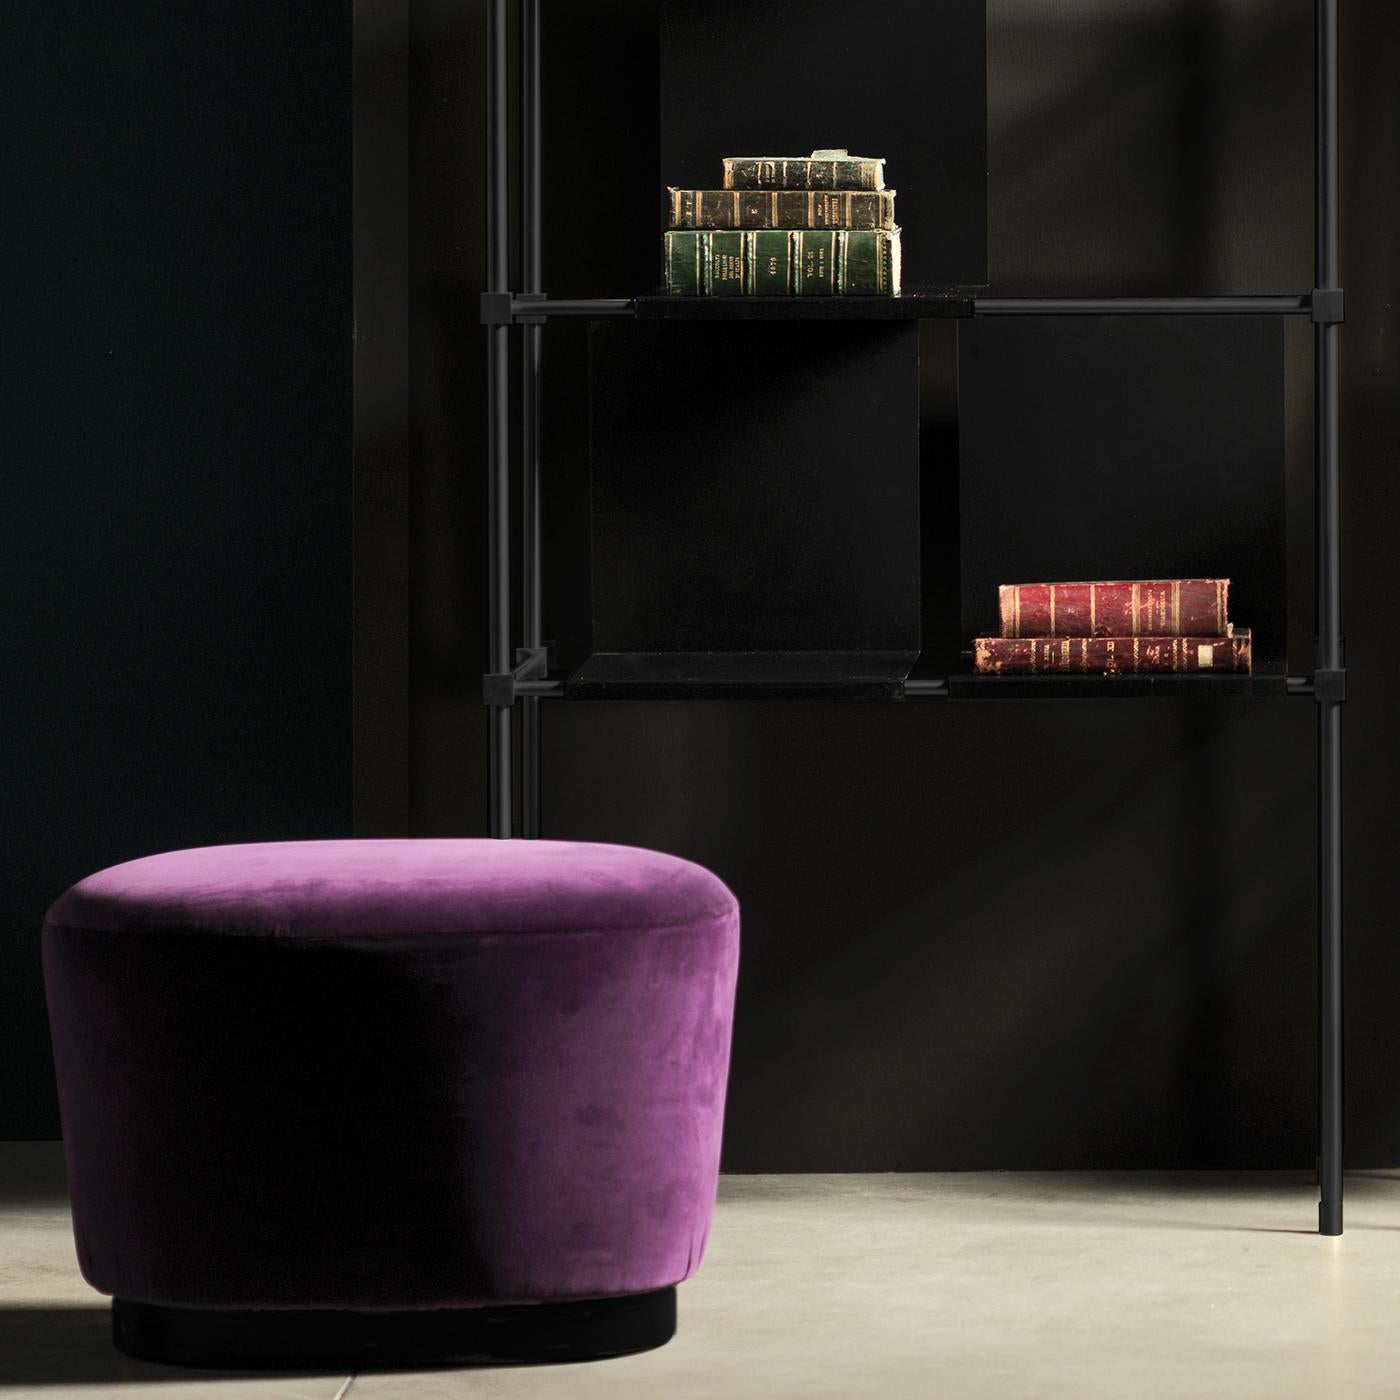 The Purple Spot Pouffe exudes a modern elegance with its clean lines and sleek silhouette. Distinguished by a solid wood base with a rich walnut finish, this pouffe is upholstered in luxurious purple velvet for a warm, moody feel. A luxurious yet